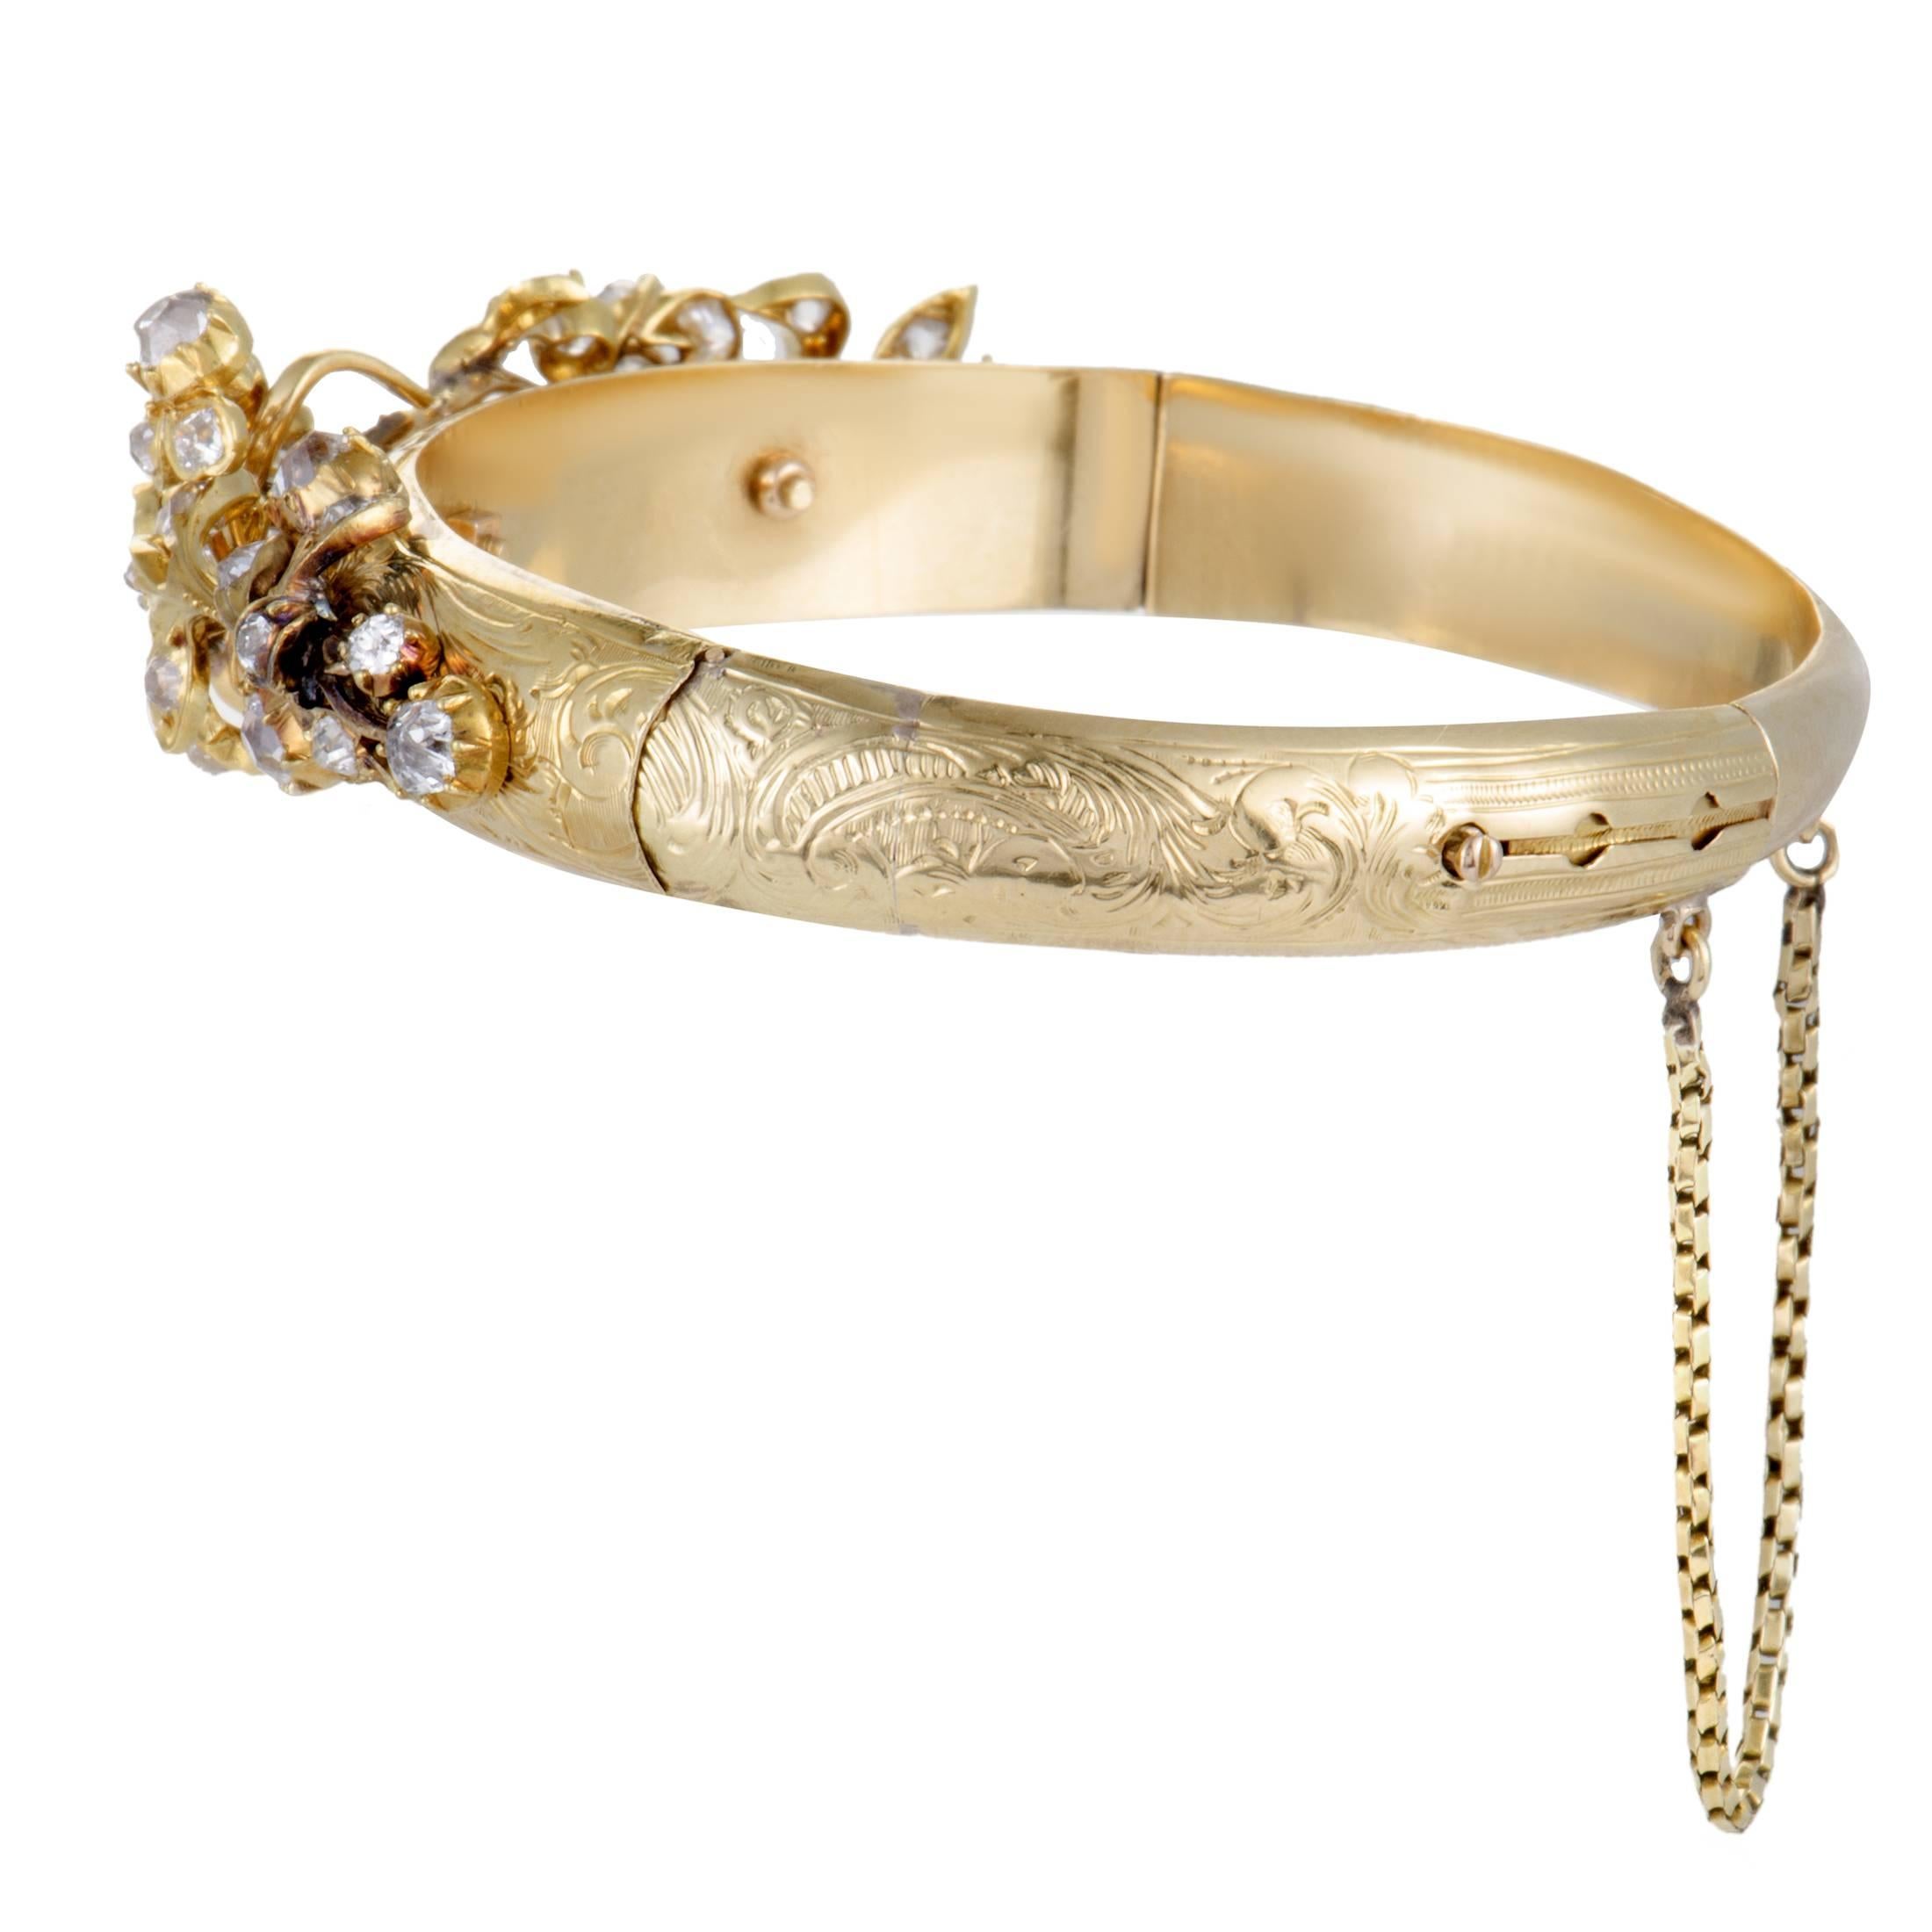 Splendidly designed and opulently embellished, this antique bracelet compels with its timeless appeal and intricate décor. The bracelet is made of classic 18K yellow gold and set with approximately 4.25 carats of diamonds.
Diameter 2.12